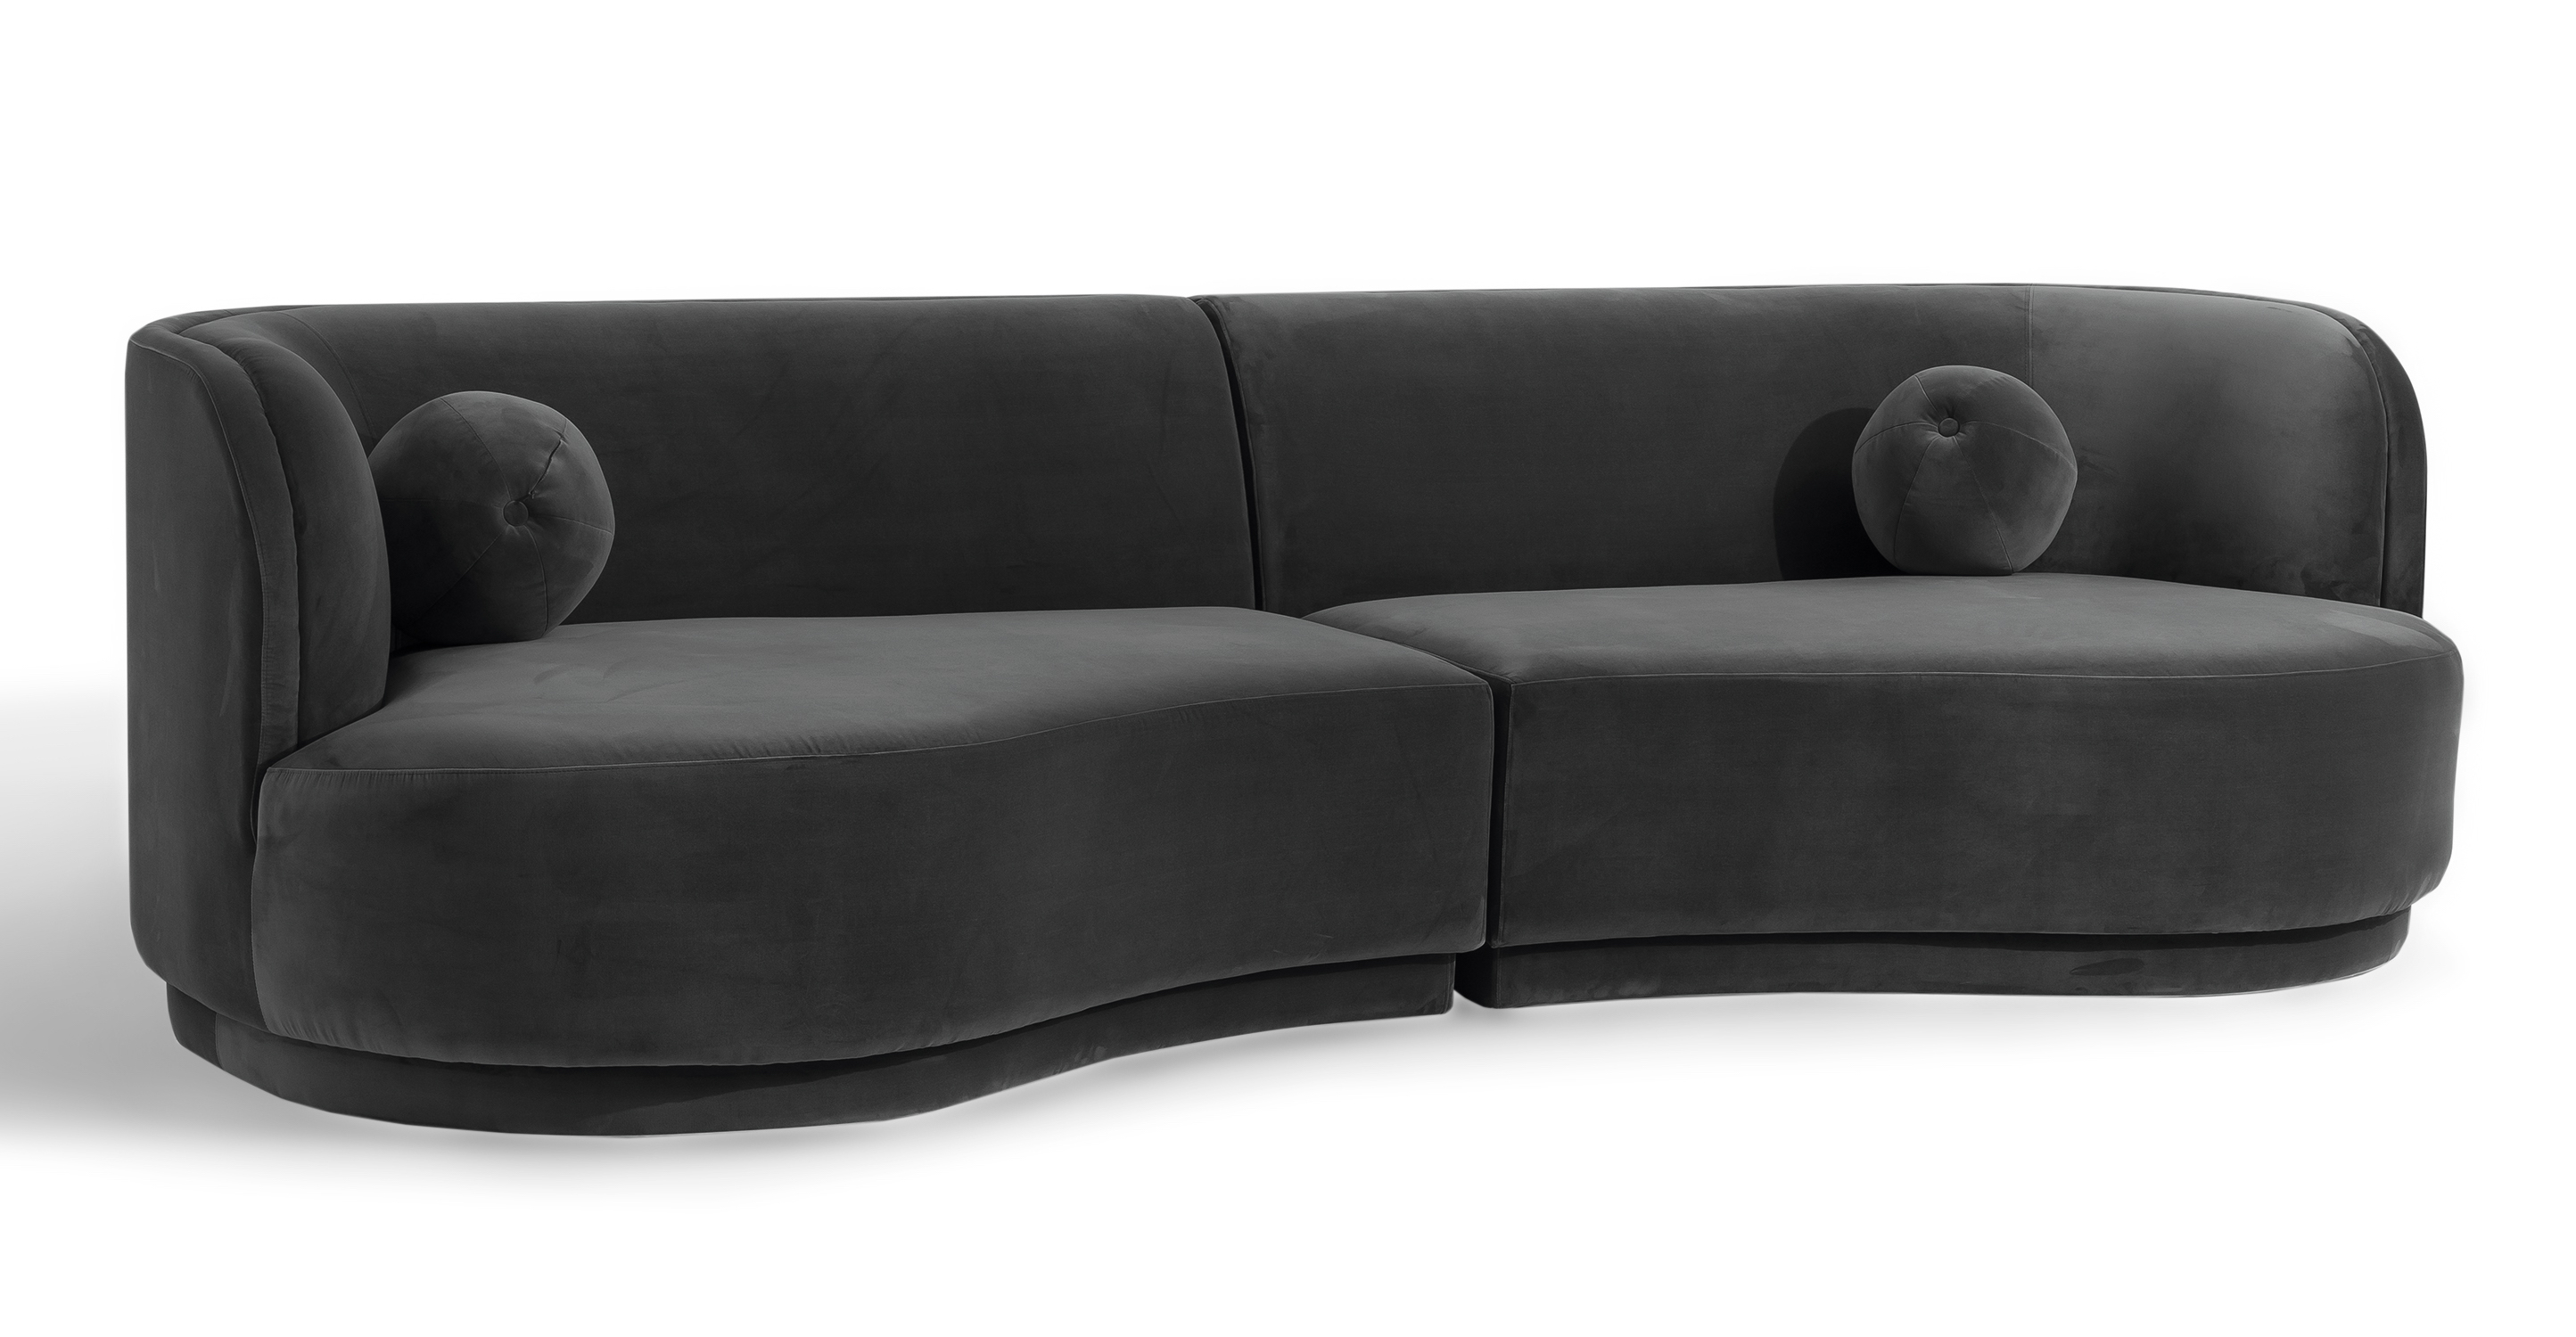 The Swoosh is a modular floor sofa series. A narrow indented frame supports the one-piece thick seat cushion. The back is attached and angled for nice lumbar support. On the loveseat pieces with arms, the shape of the arm is recessed and curved at the top. All the pieces have a curve to their shape - the more you add pieces, the more of a curve you get. The back is flat and smooth. Included with each piece is a matching round ball pillow. Solvang 2-pc Sofa, gray Fossil velvet set uses: One Swoosh left arm chaise, and one Swoosh right chaise.